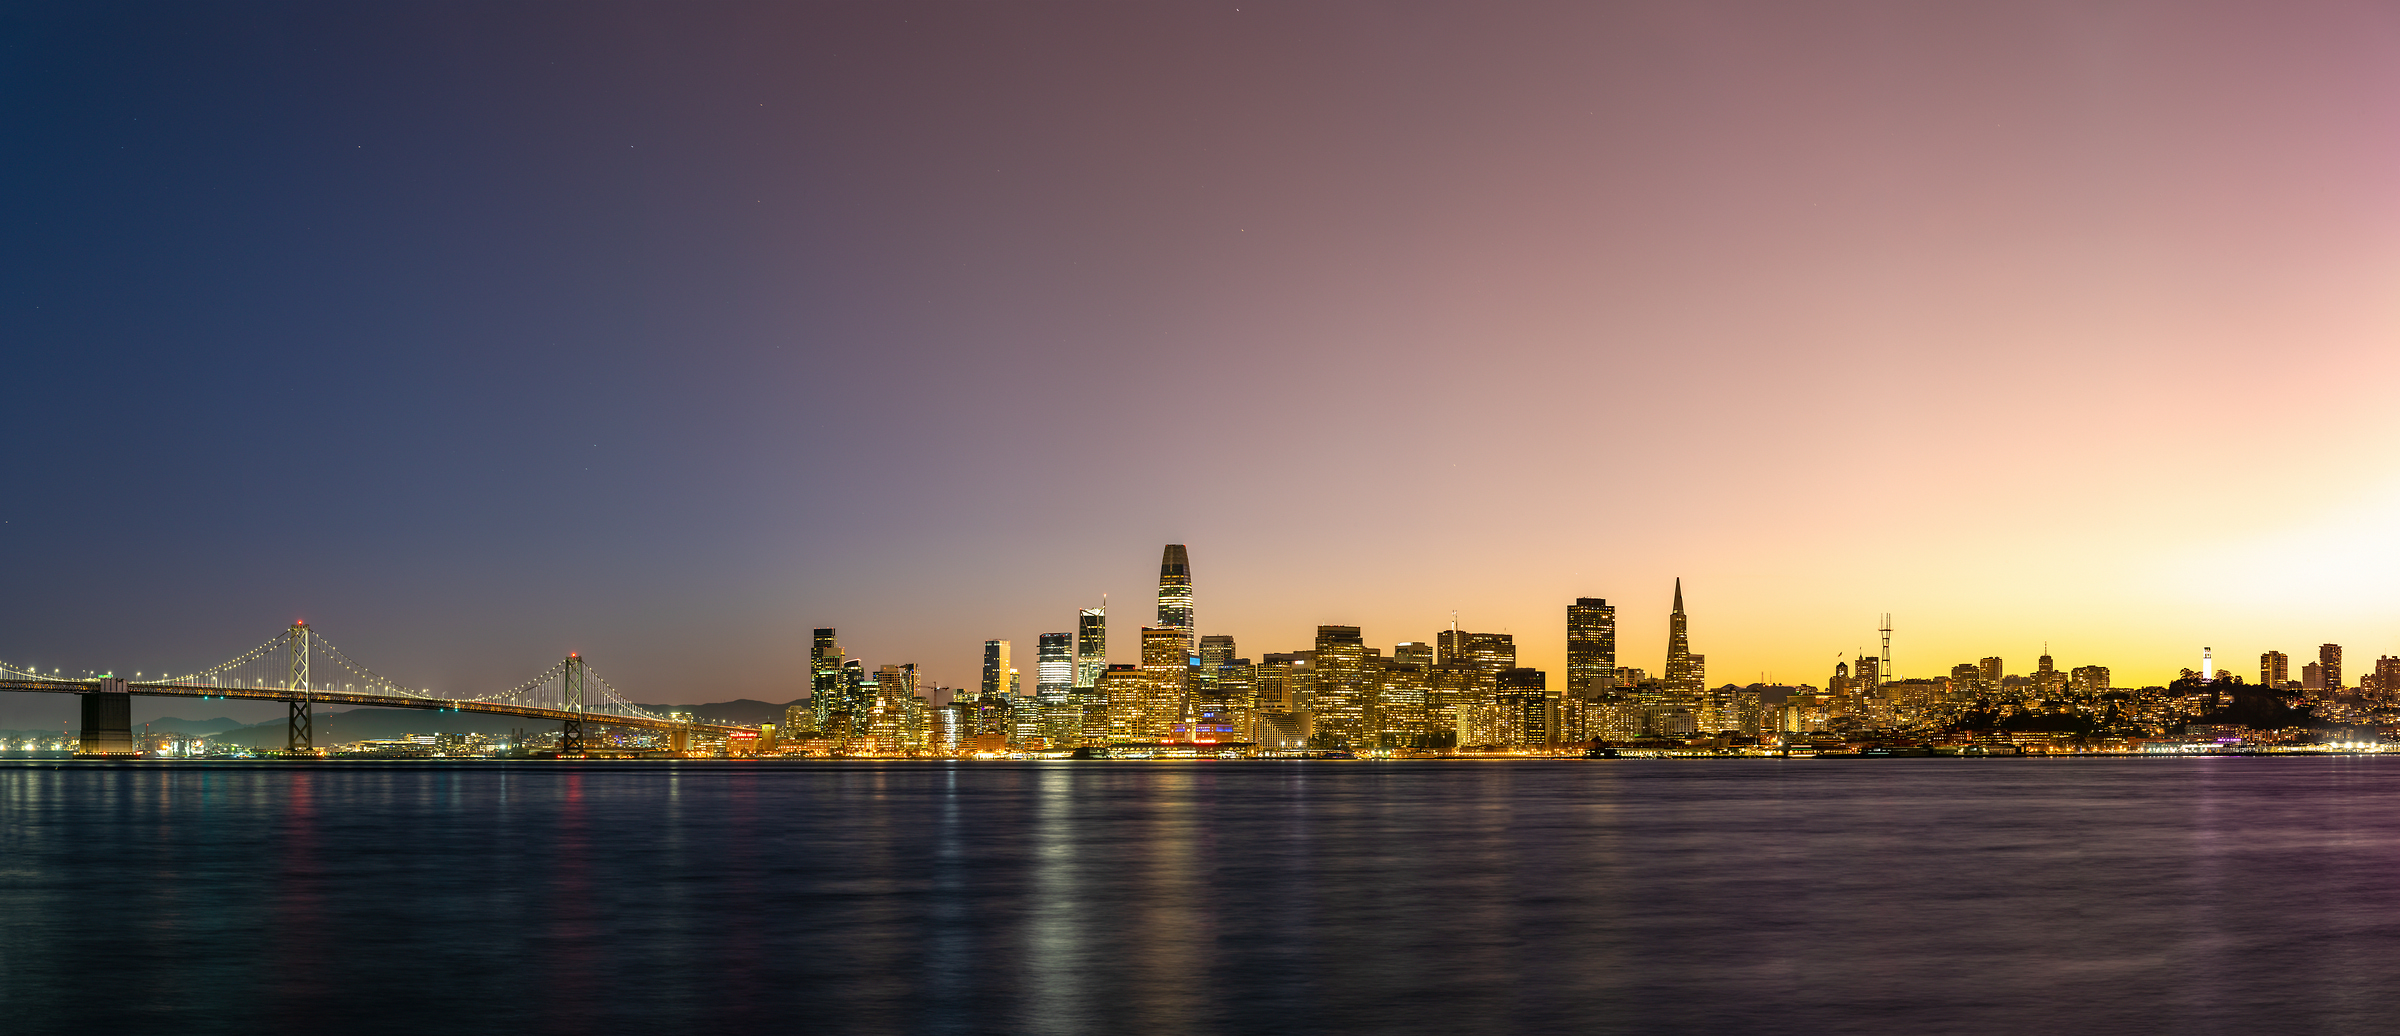 629 megapixels! A very high resolution, large-format VAST photo print of the San Francisco Skyline from Treasure Island at sunset; cityscape photograph created by Justin Katz in Treasure Island, San Francisco, California